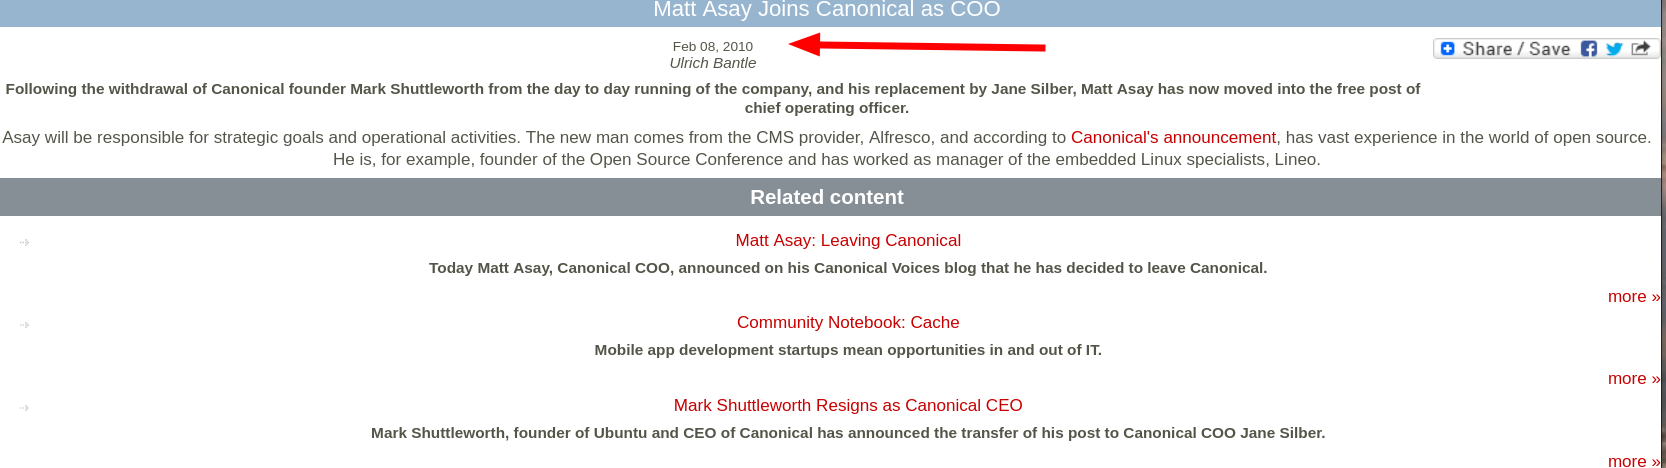 Following the withdrawal of Canonical founder Mark Shuttleworth from the day to day running of the company, and his replacement by Jane Silber, Matt Asay has now moved into the free post of chief operating officer.